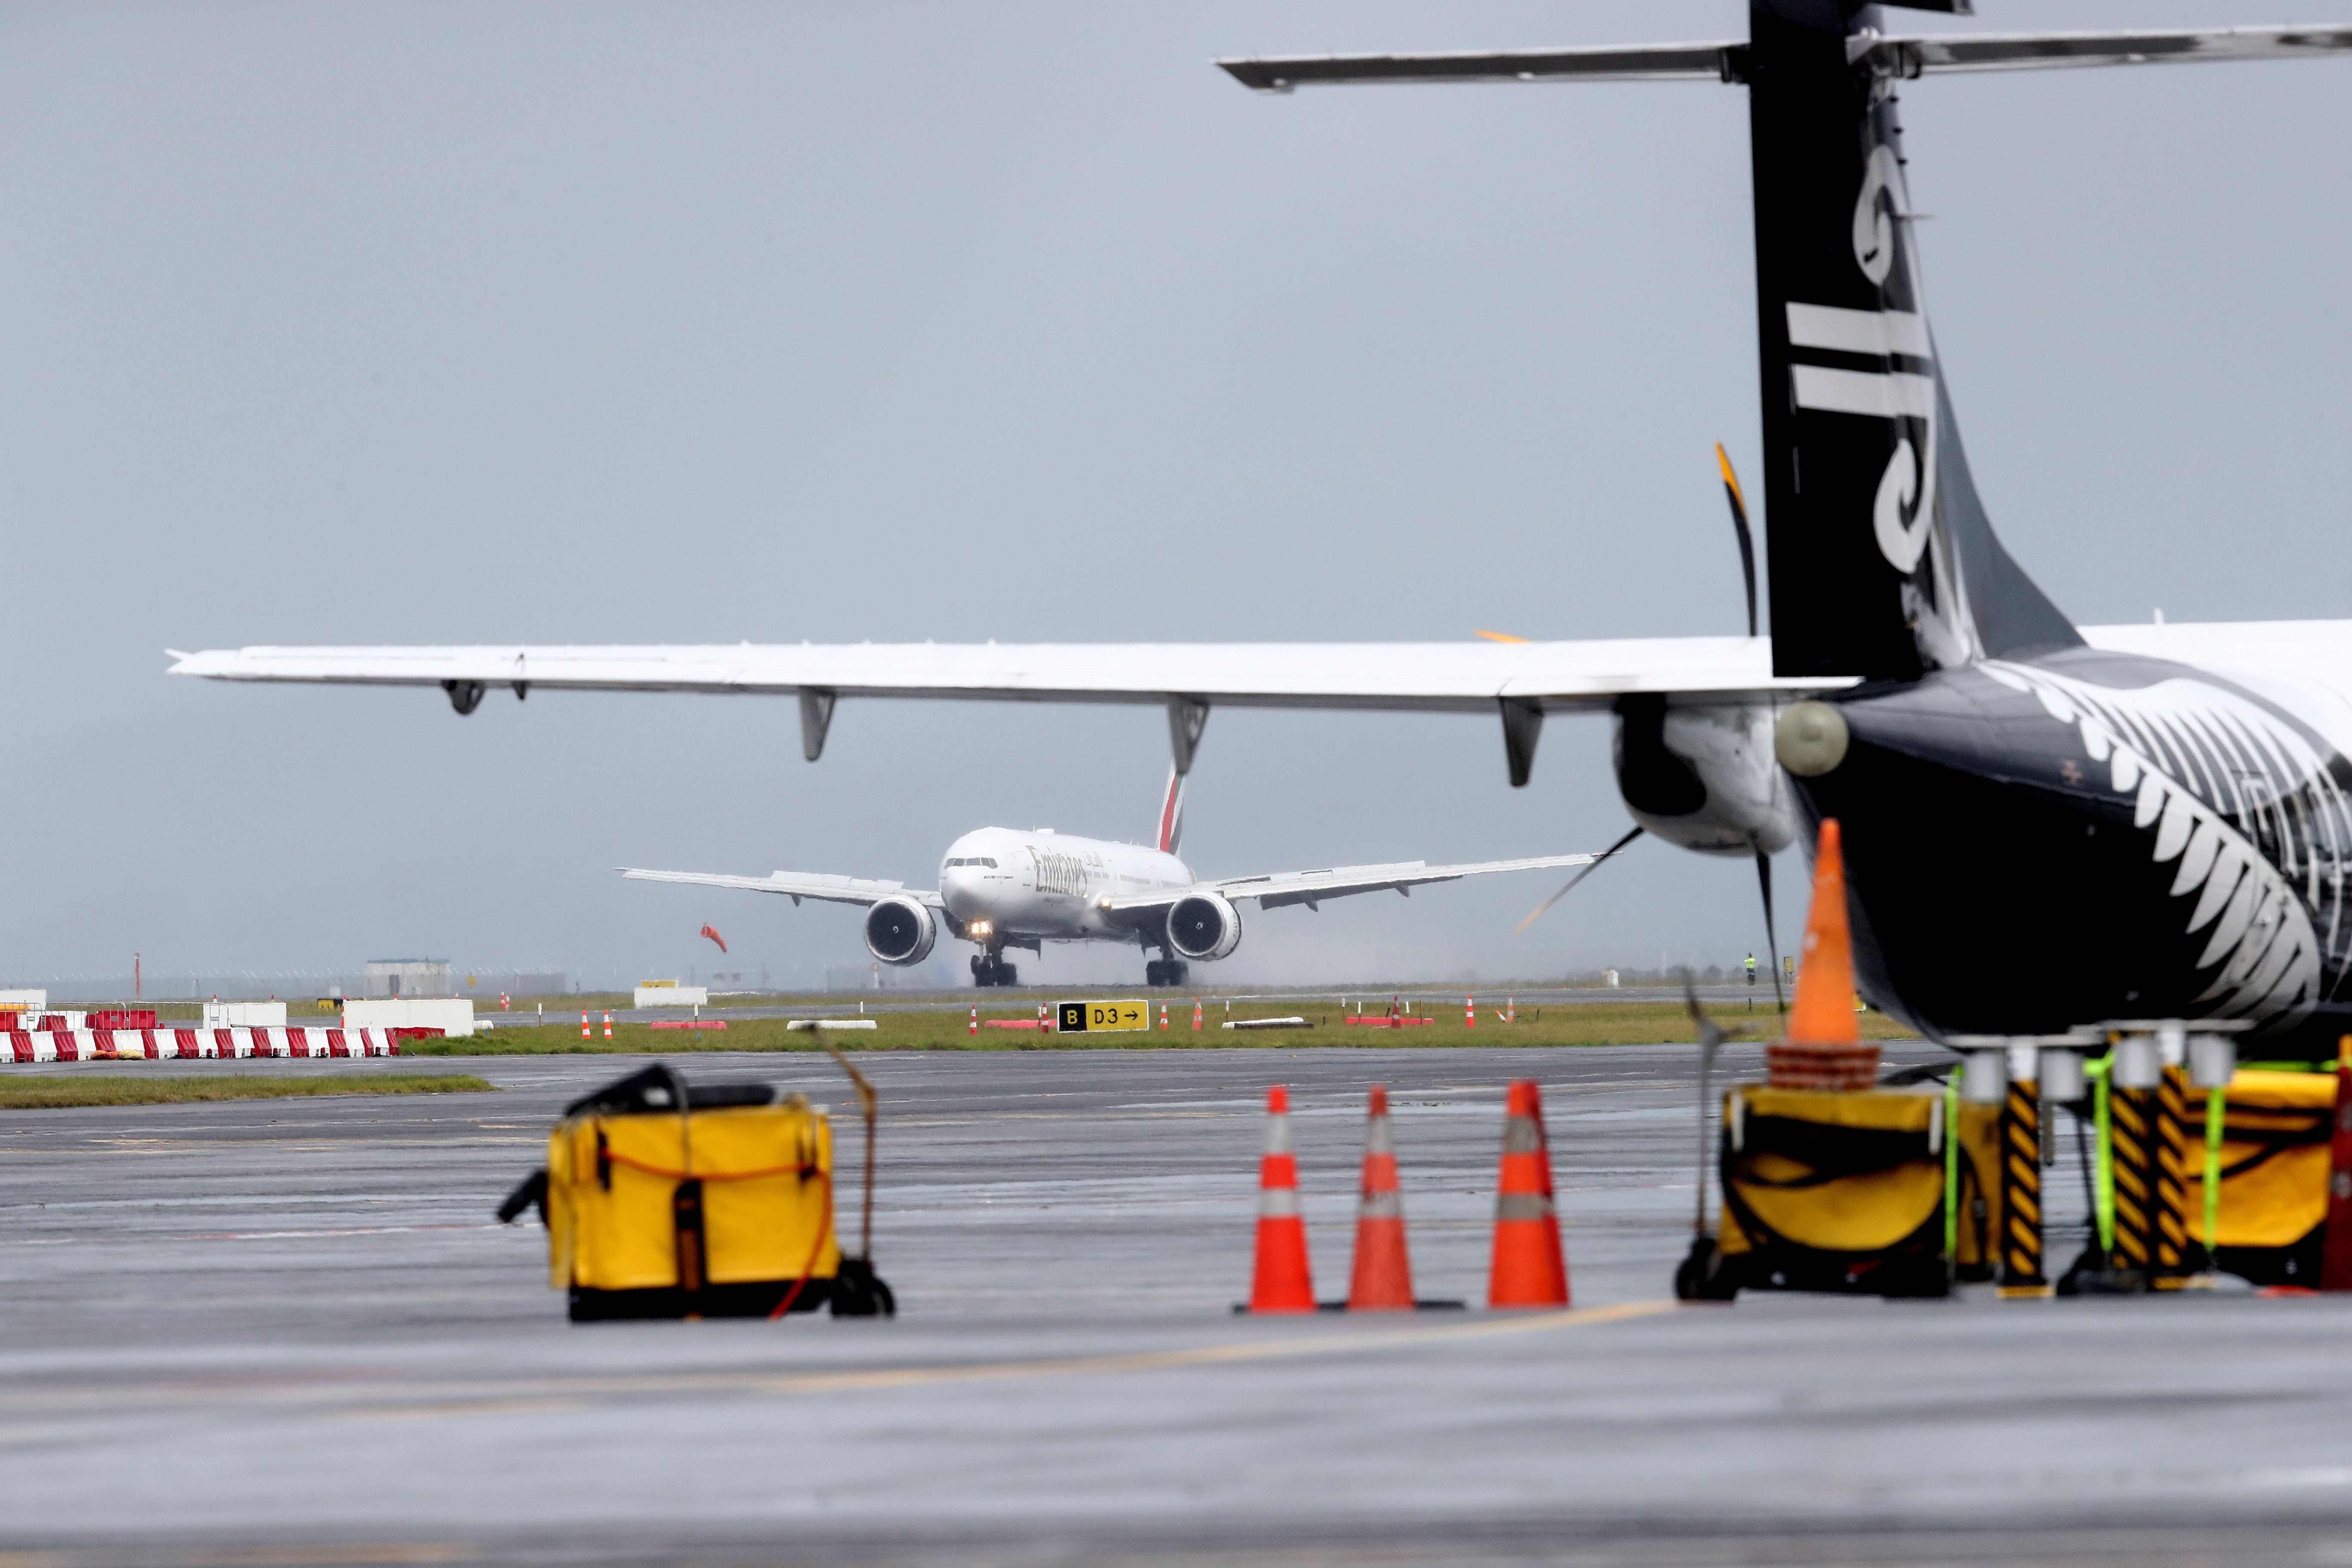 Batteries were the most confiscated item by New Zealands Aviation Security